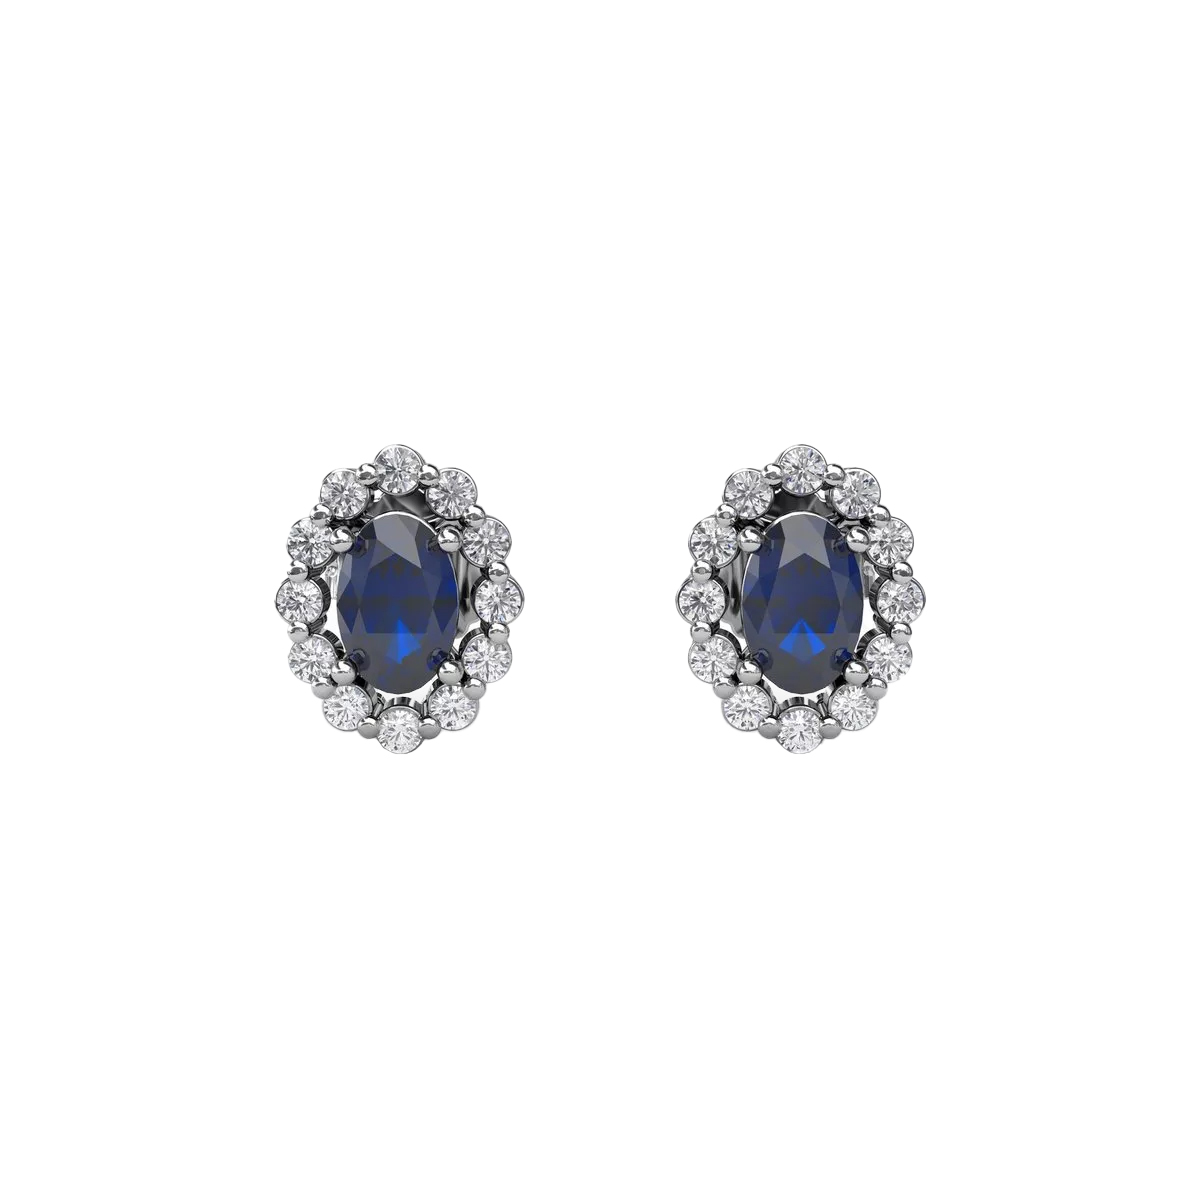 14K White Gold Oval Sapphire Earrings with Diamond Halo